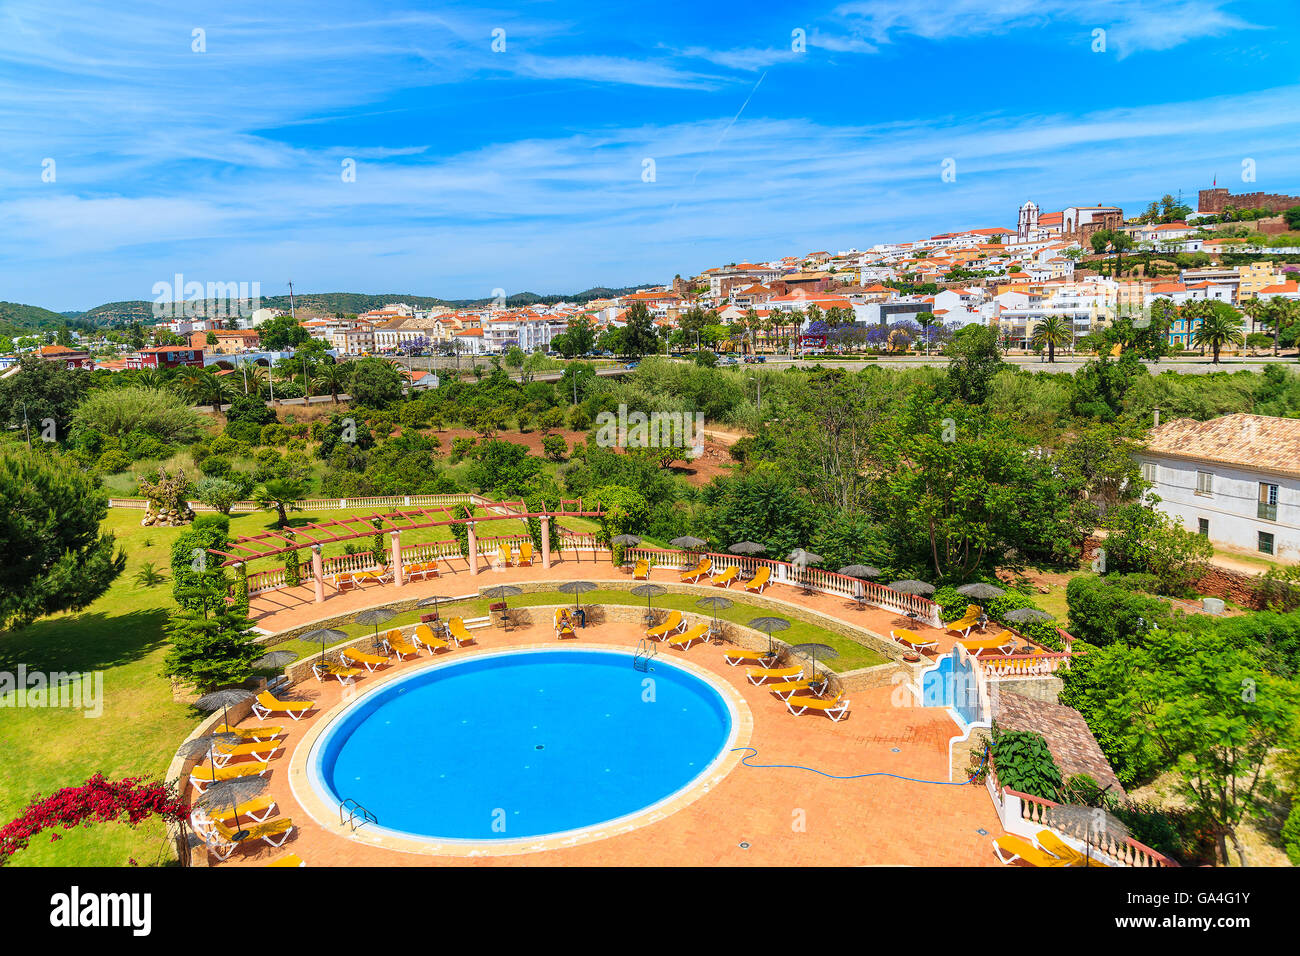 A view of Silves town buildings and pool of luxury hotel, Algarve region, Portugal Stock Photo